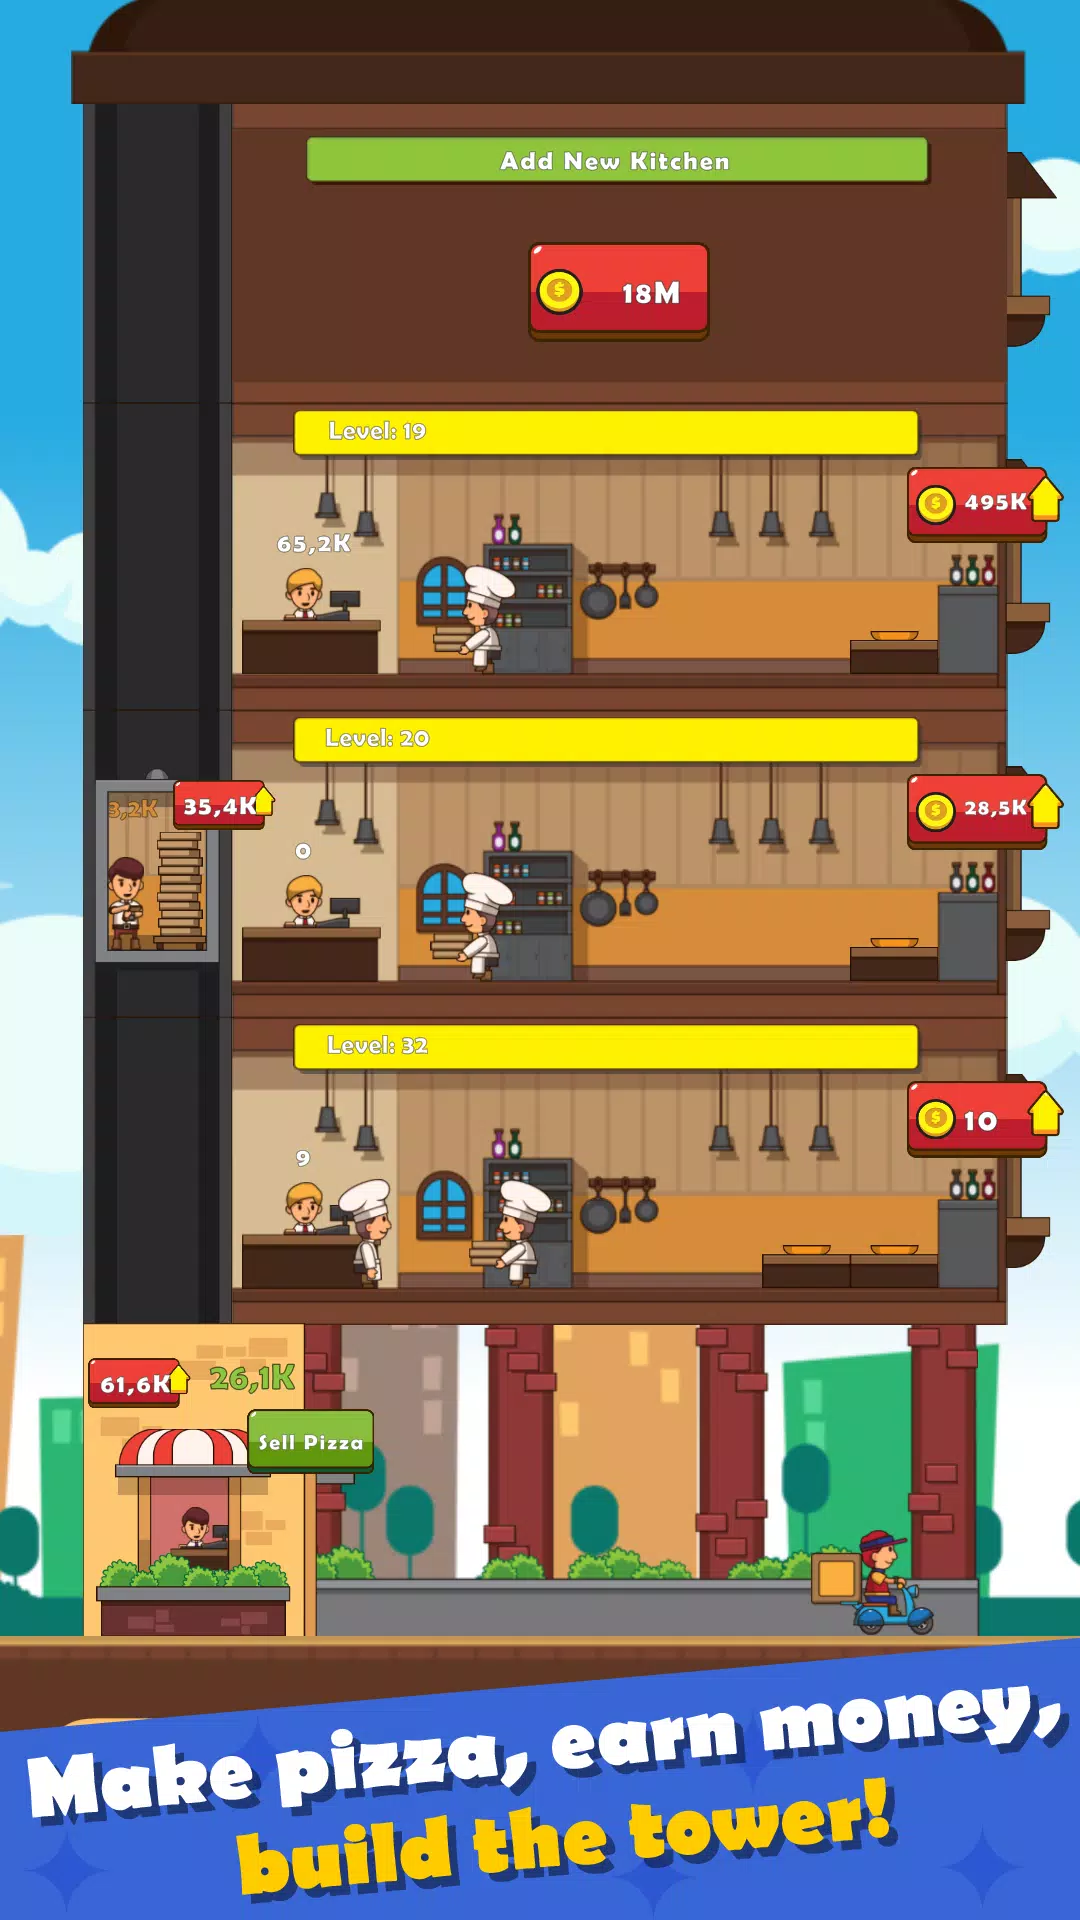 Download Pizza Super Tower Mobile Game APK v1.1 For Android